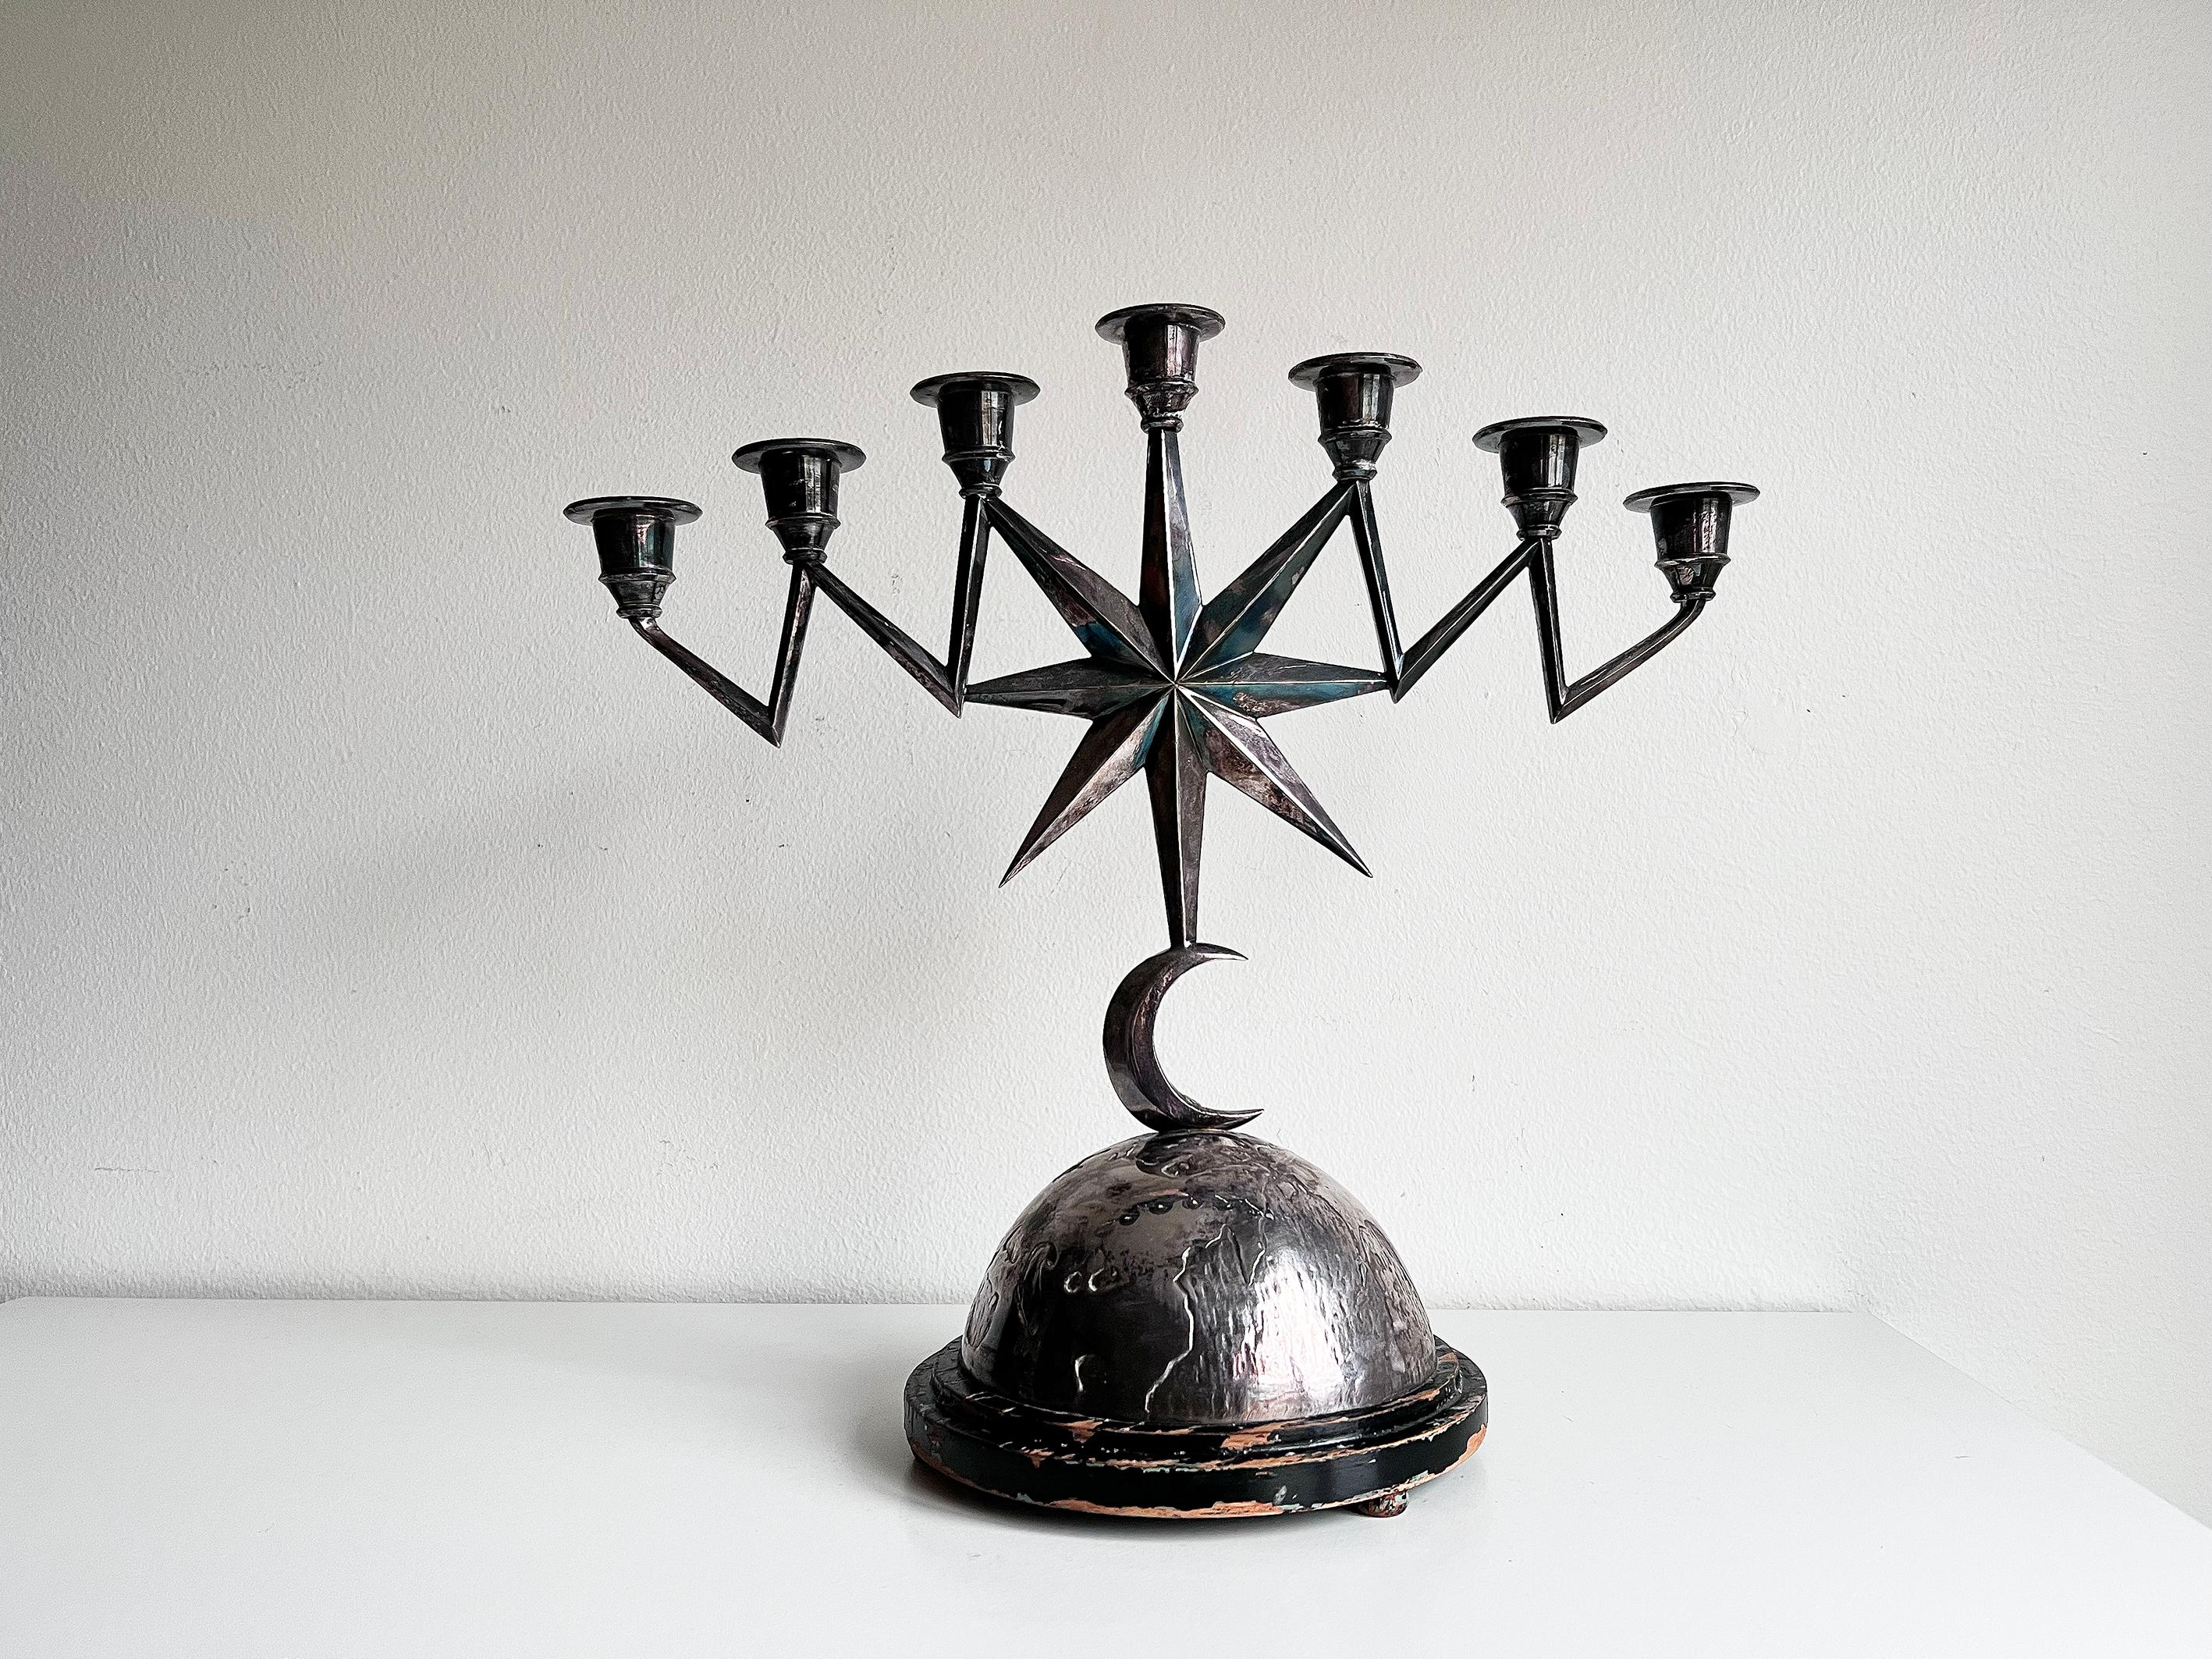 Unknown Art Deco 7-Armed Candelabra, 1920 - 30s For Sale